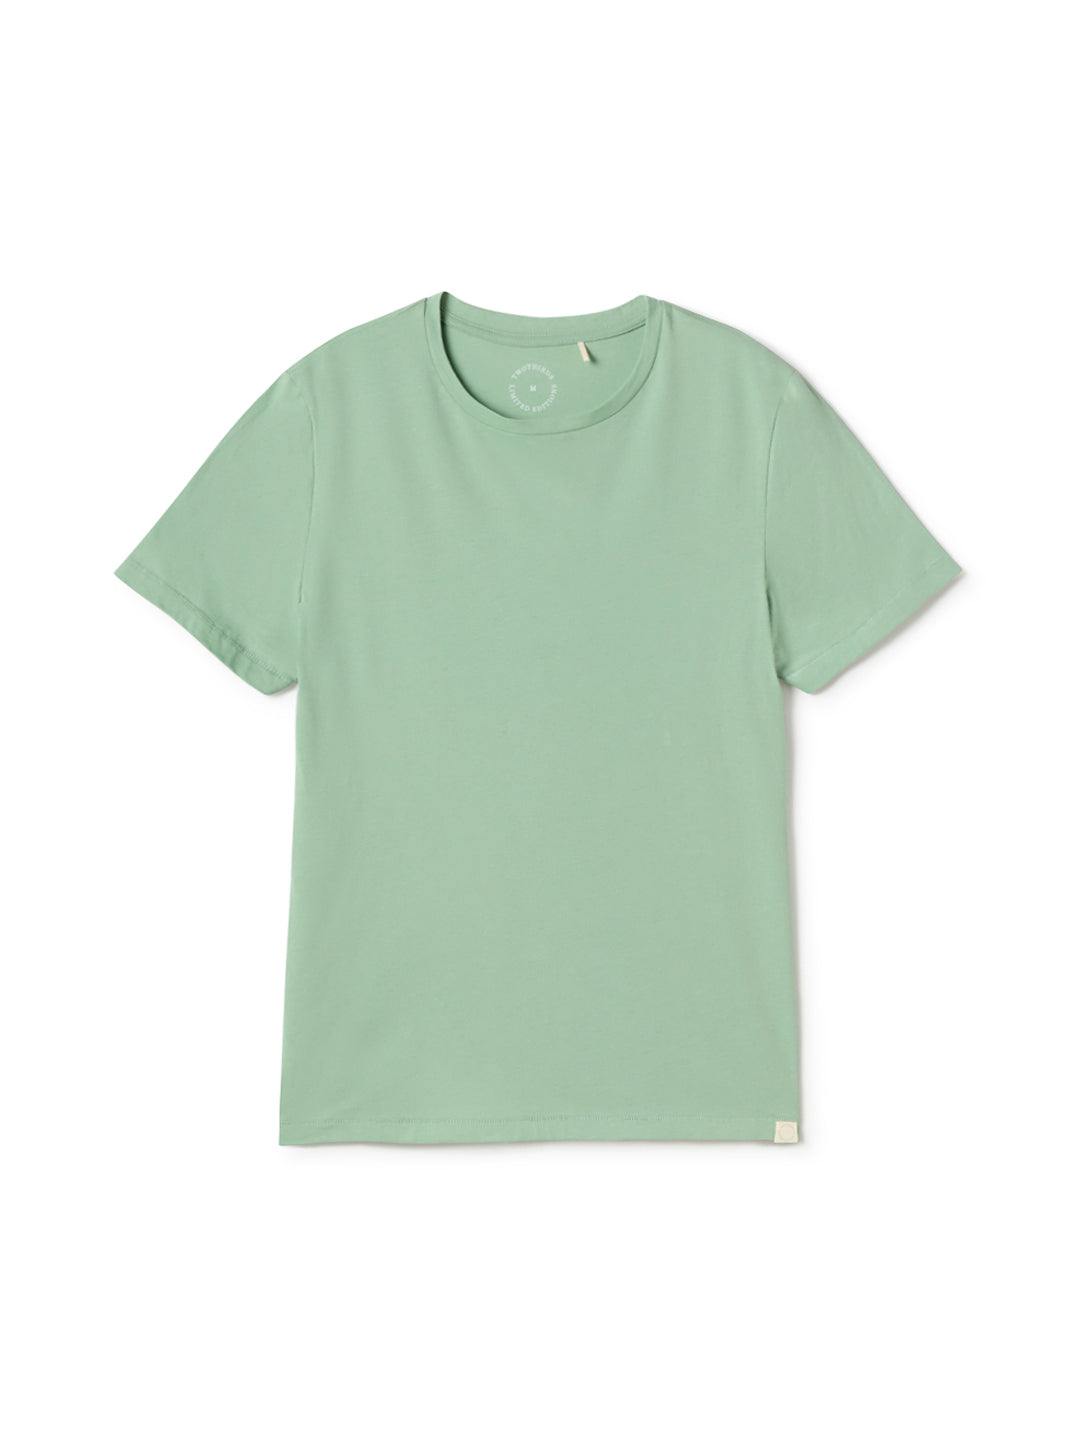 Get To Know You Sage Green Tunic – Shop the Mint